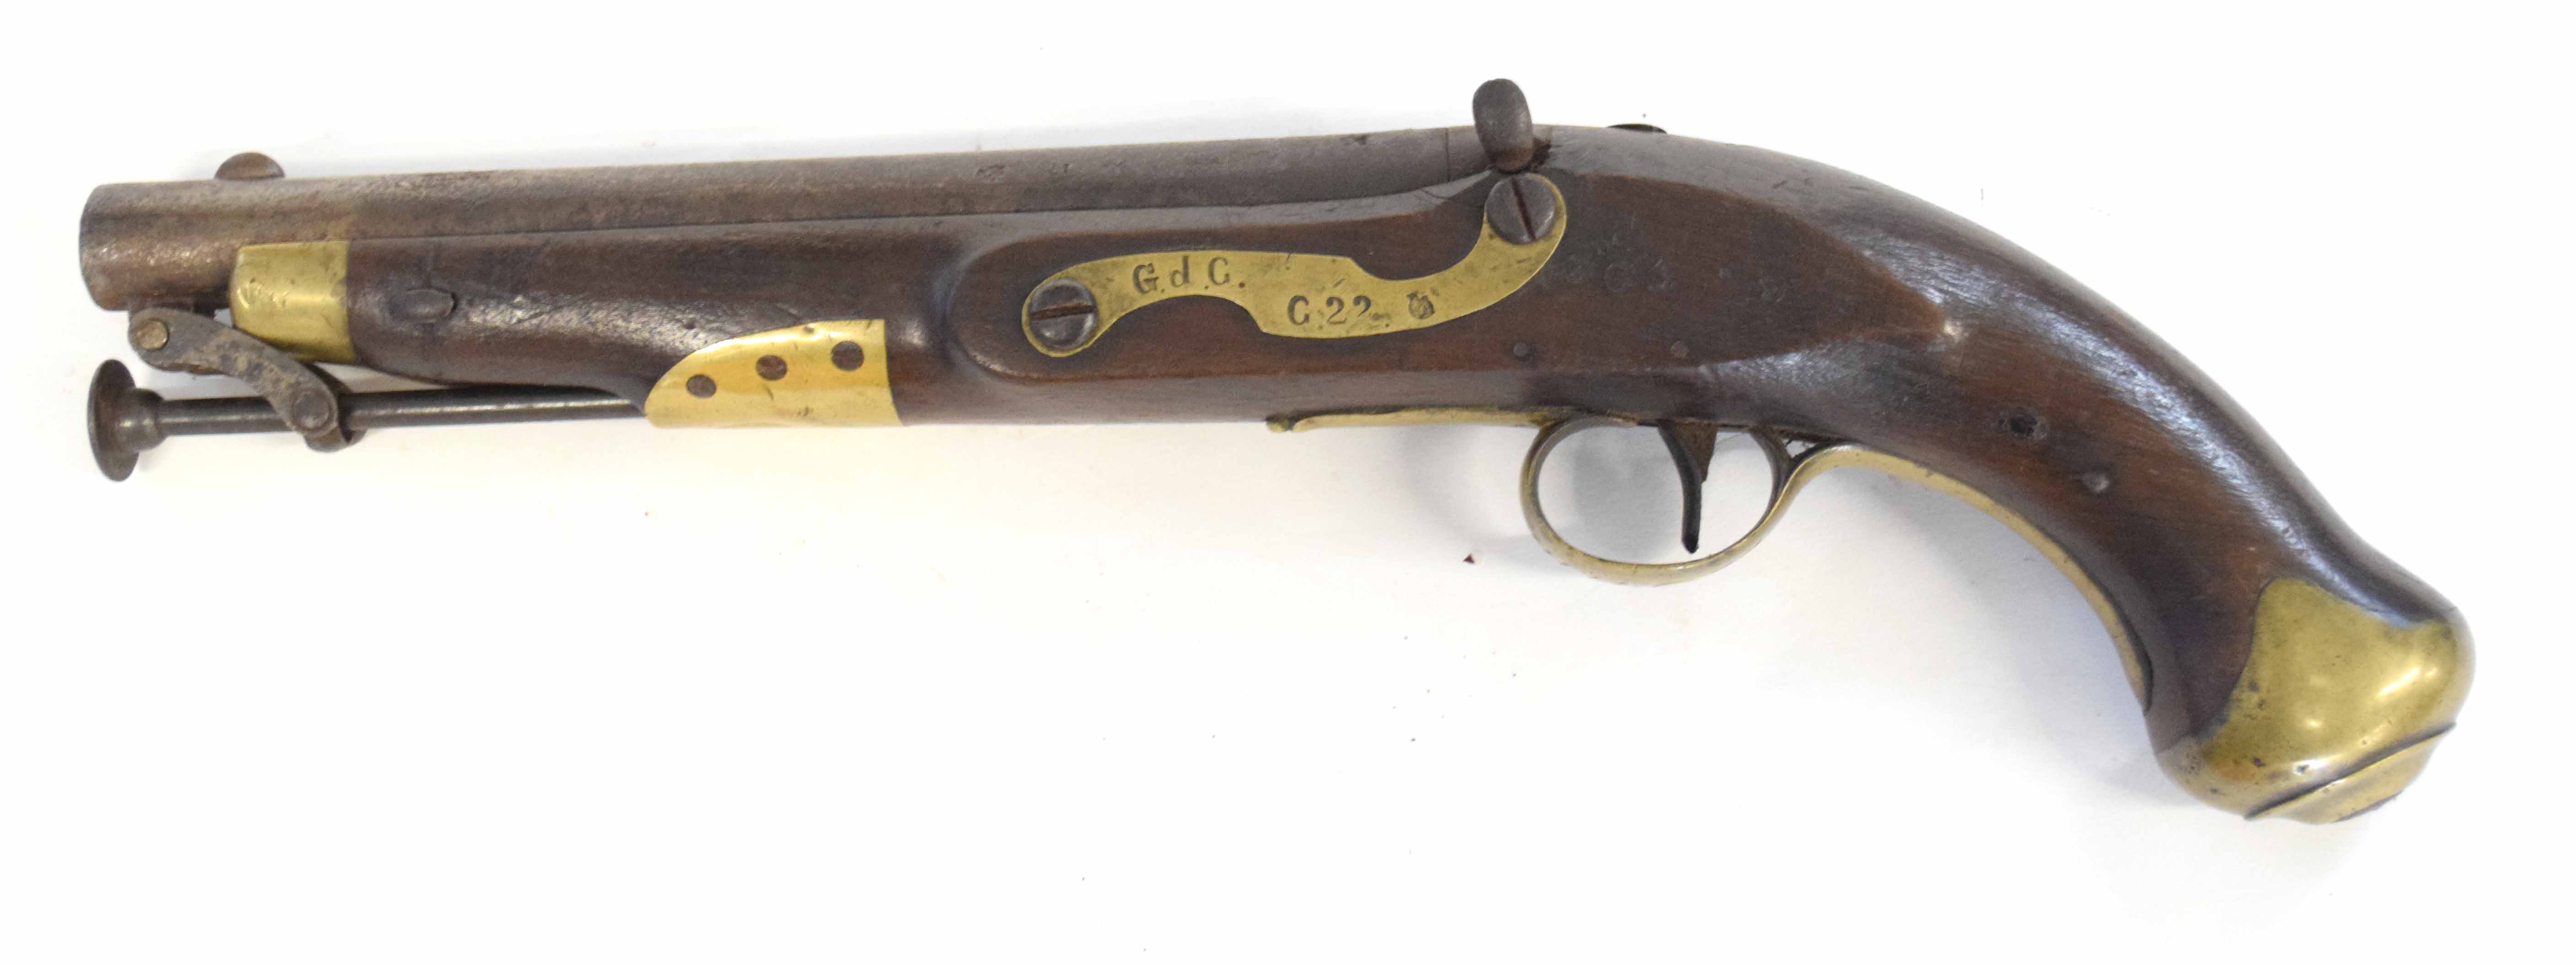 Two pistols, one Georgian Tower flintlock pistol converted to percussion cap, with brass butt cap, - Image 6 of 8